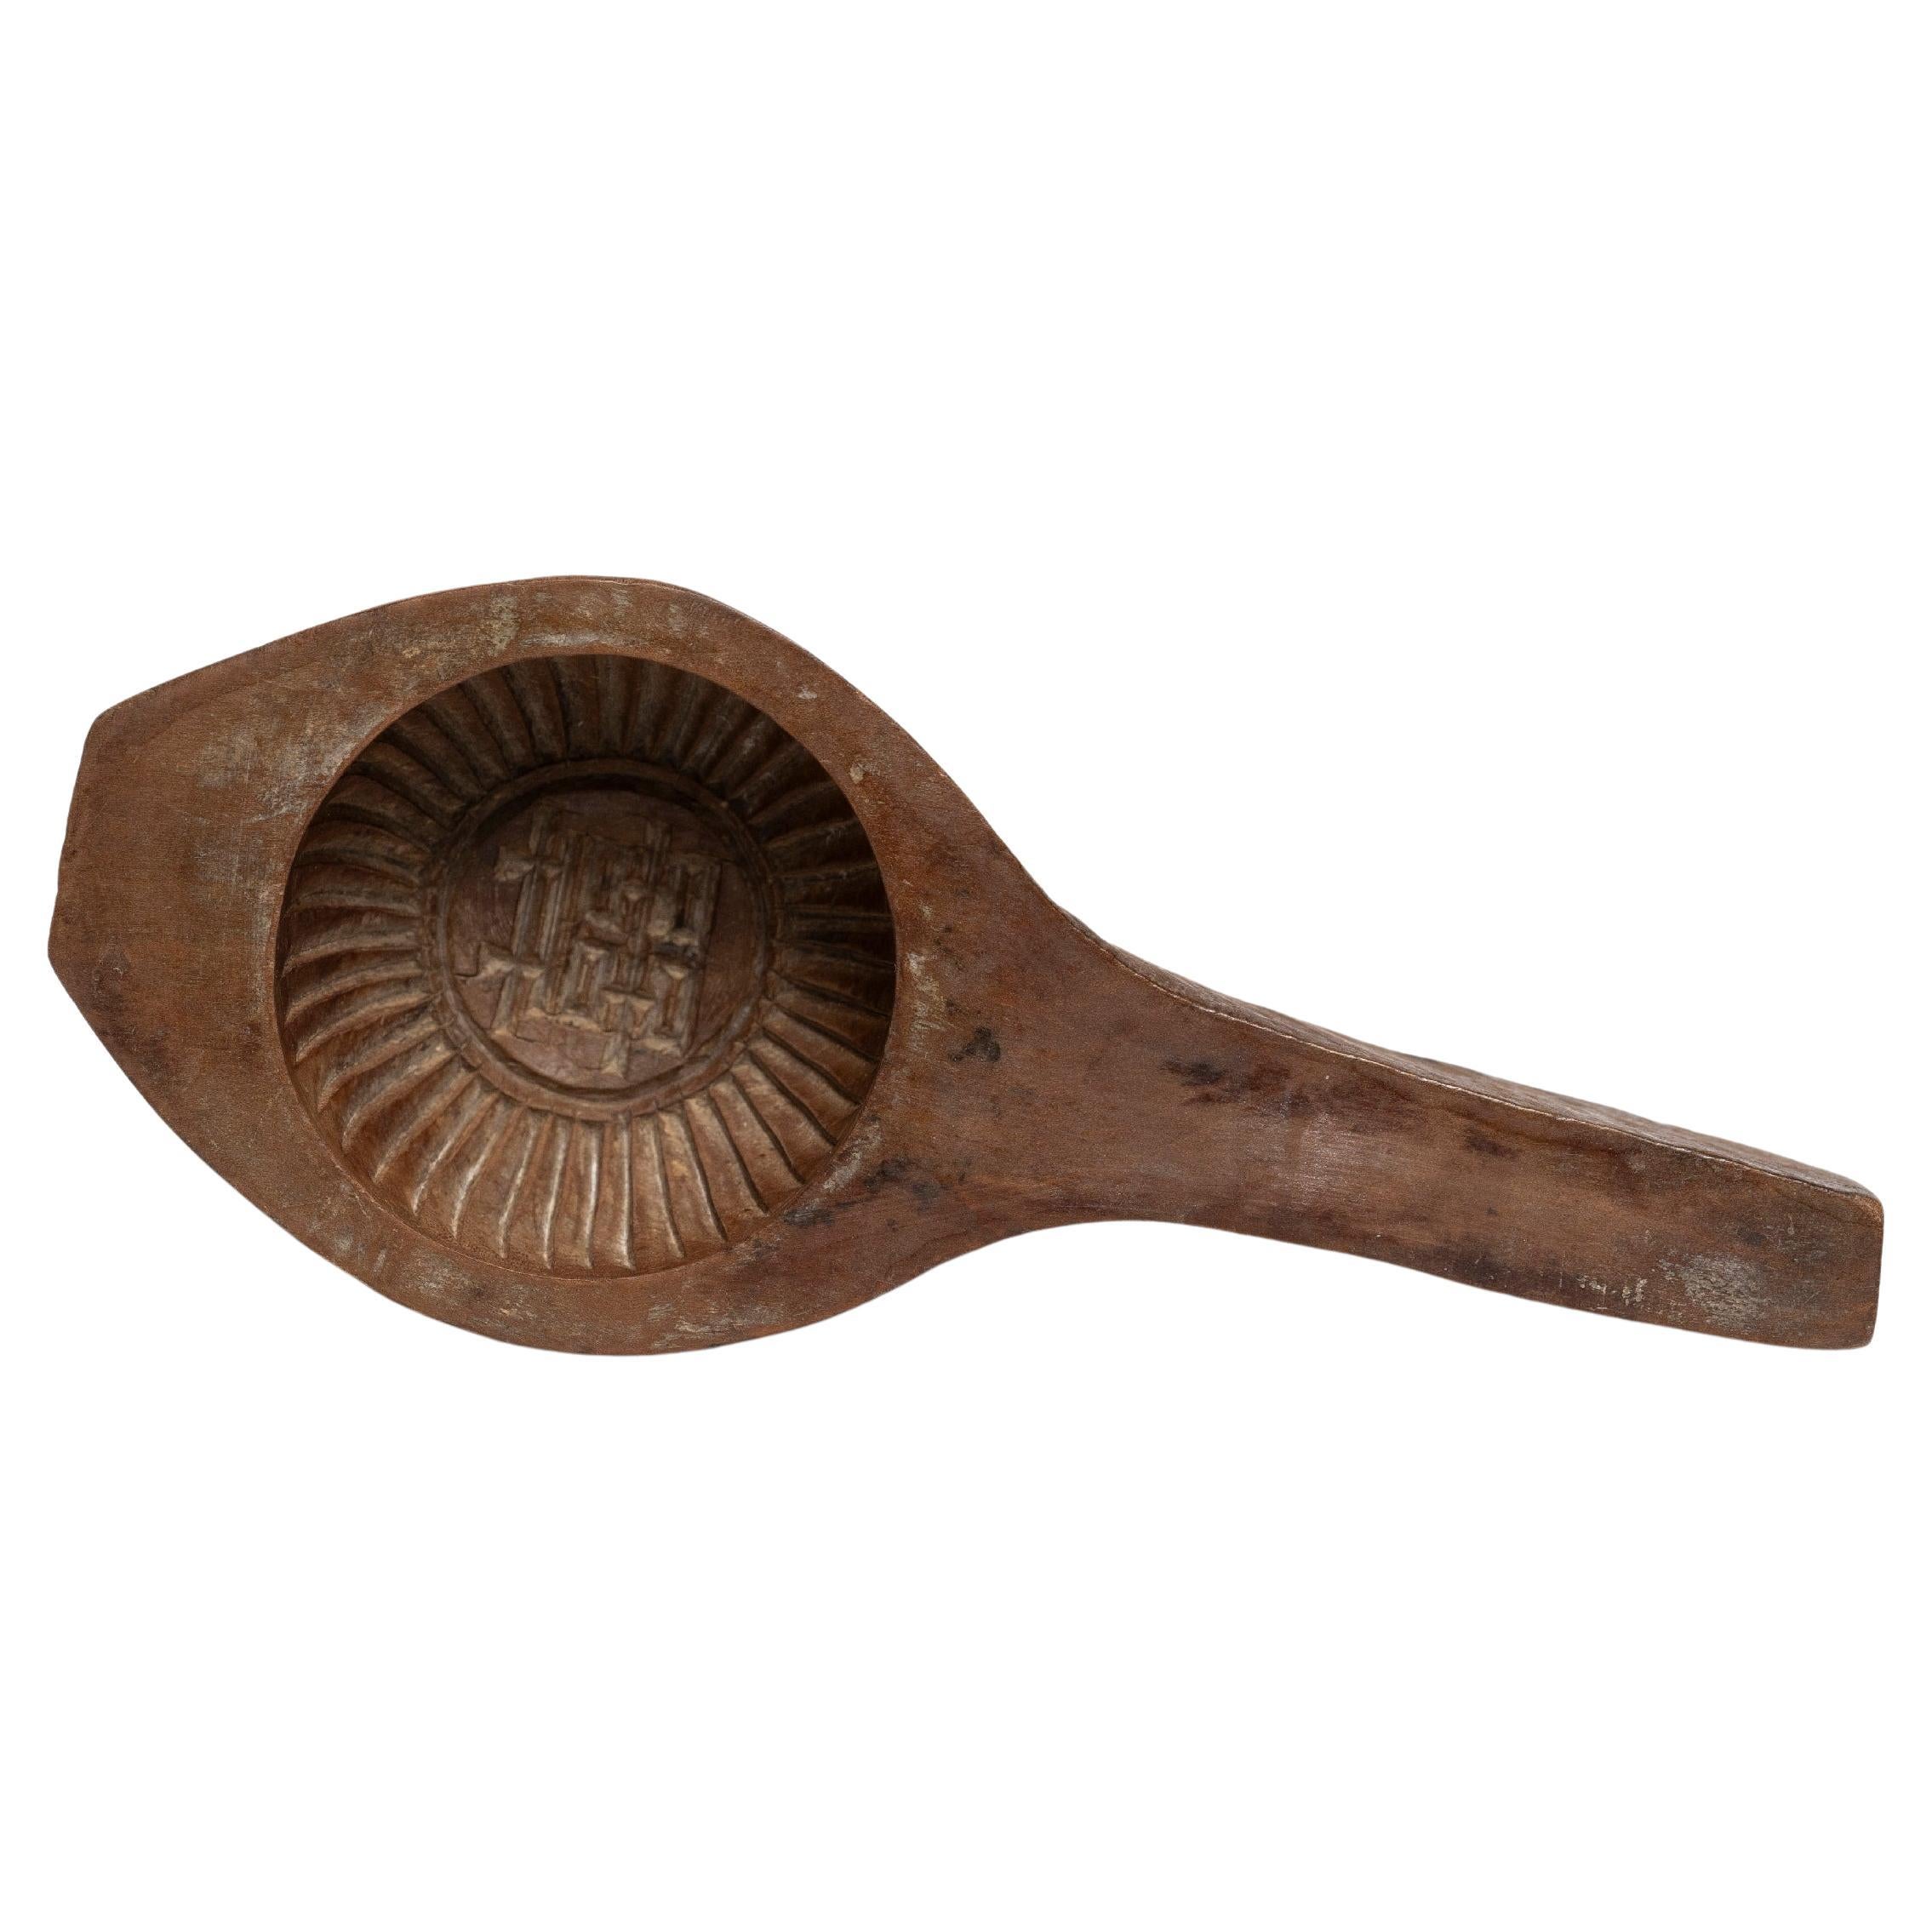 Handheld Chinese Mooncake Mold, c. 1900 For Sale